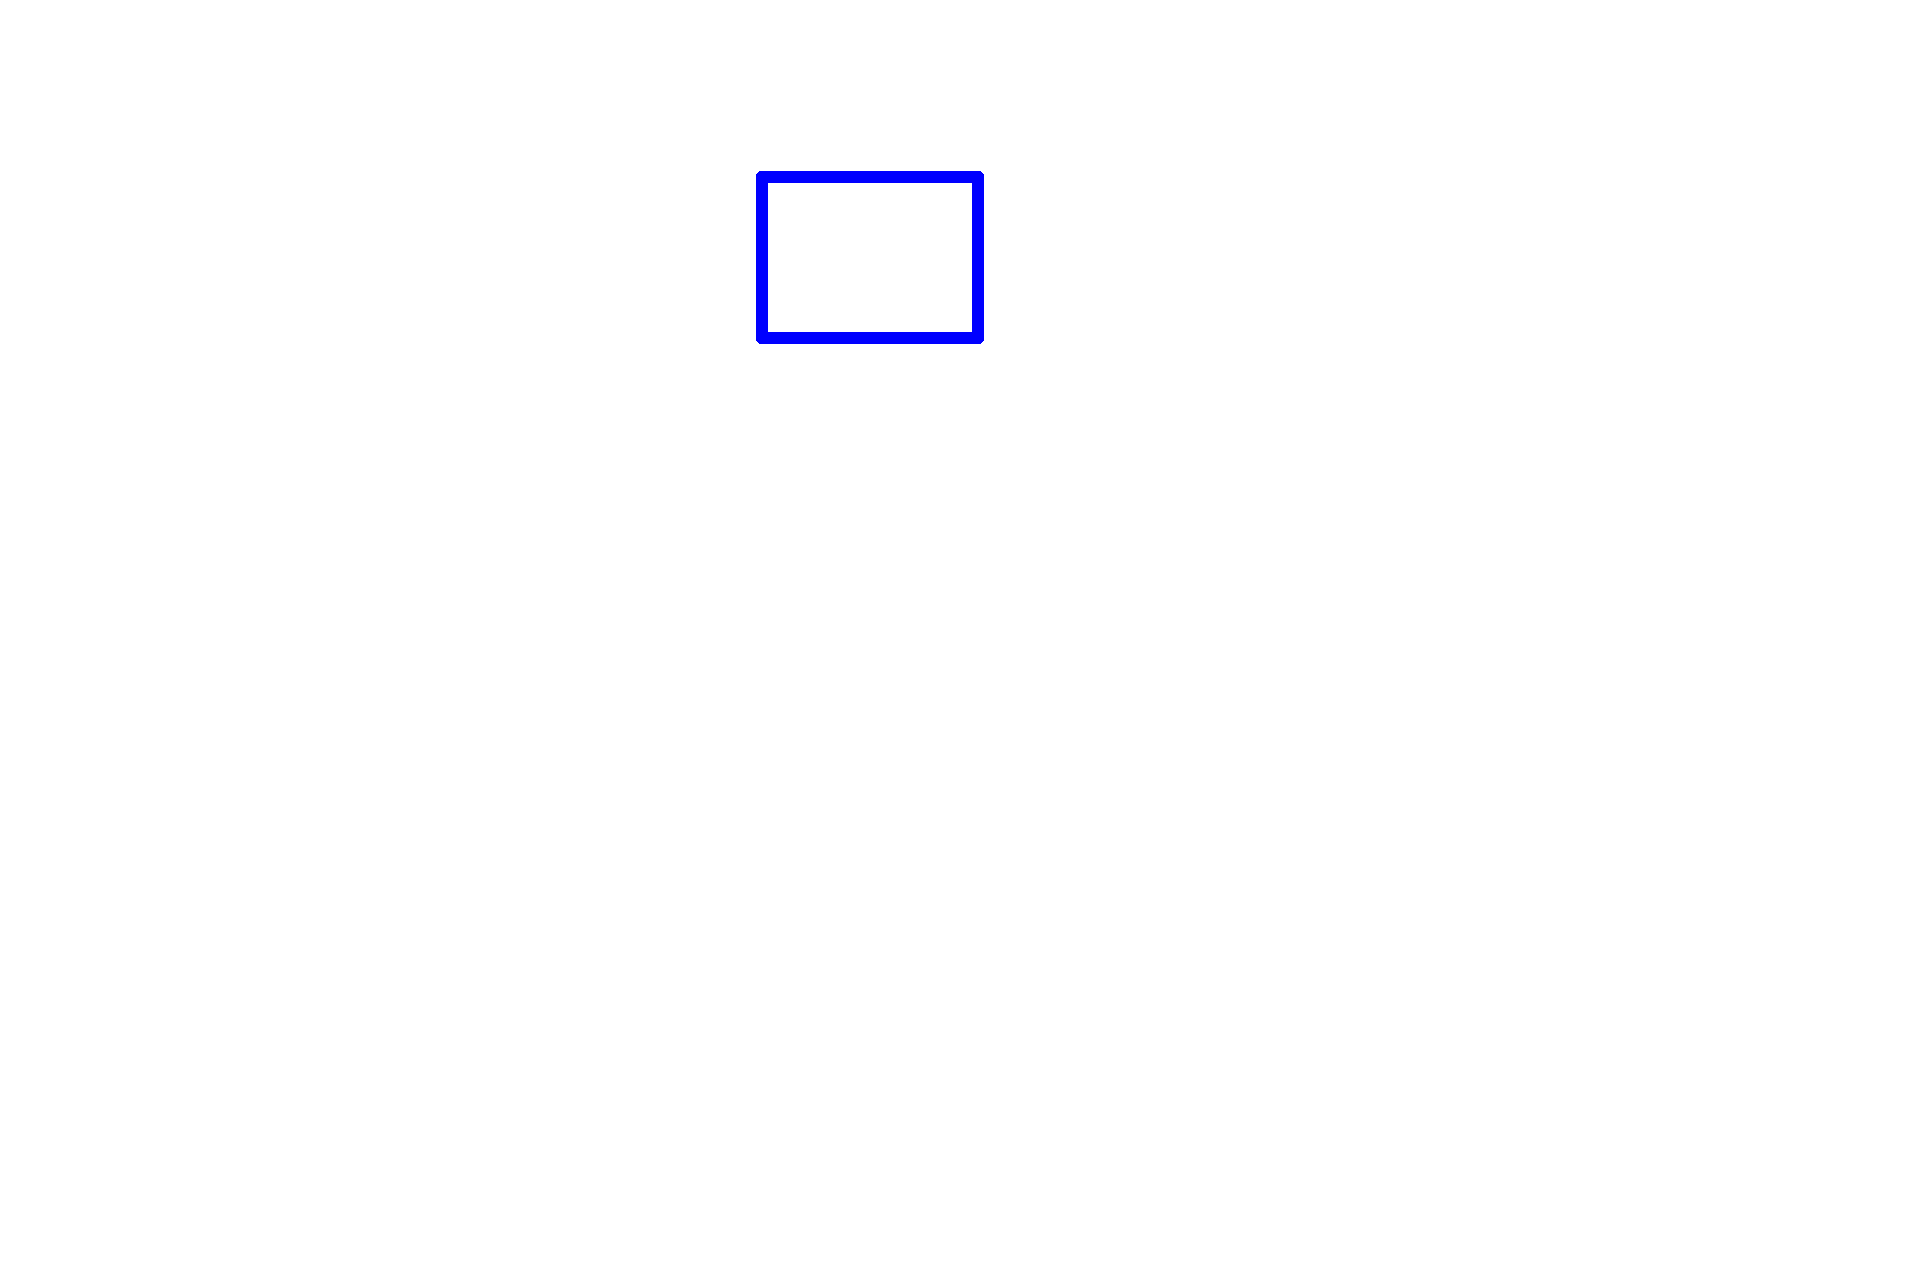 Area shown in the next image <p>The next image is similar to that enclosed by the blue rectangle.</p>
